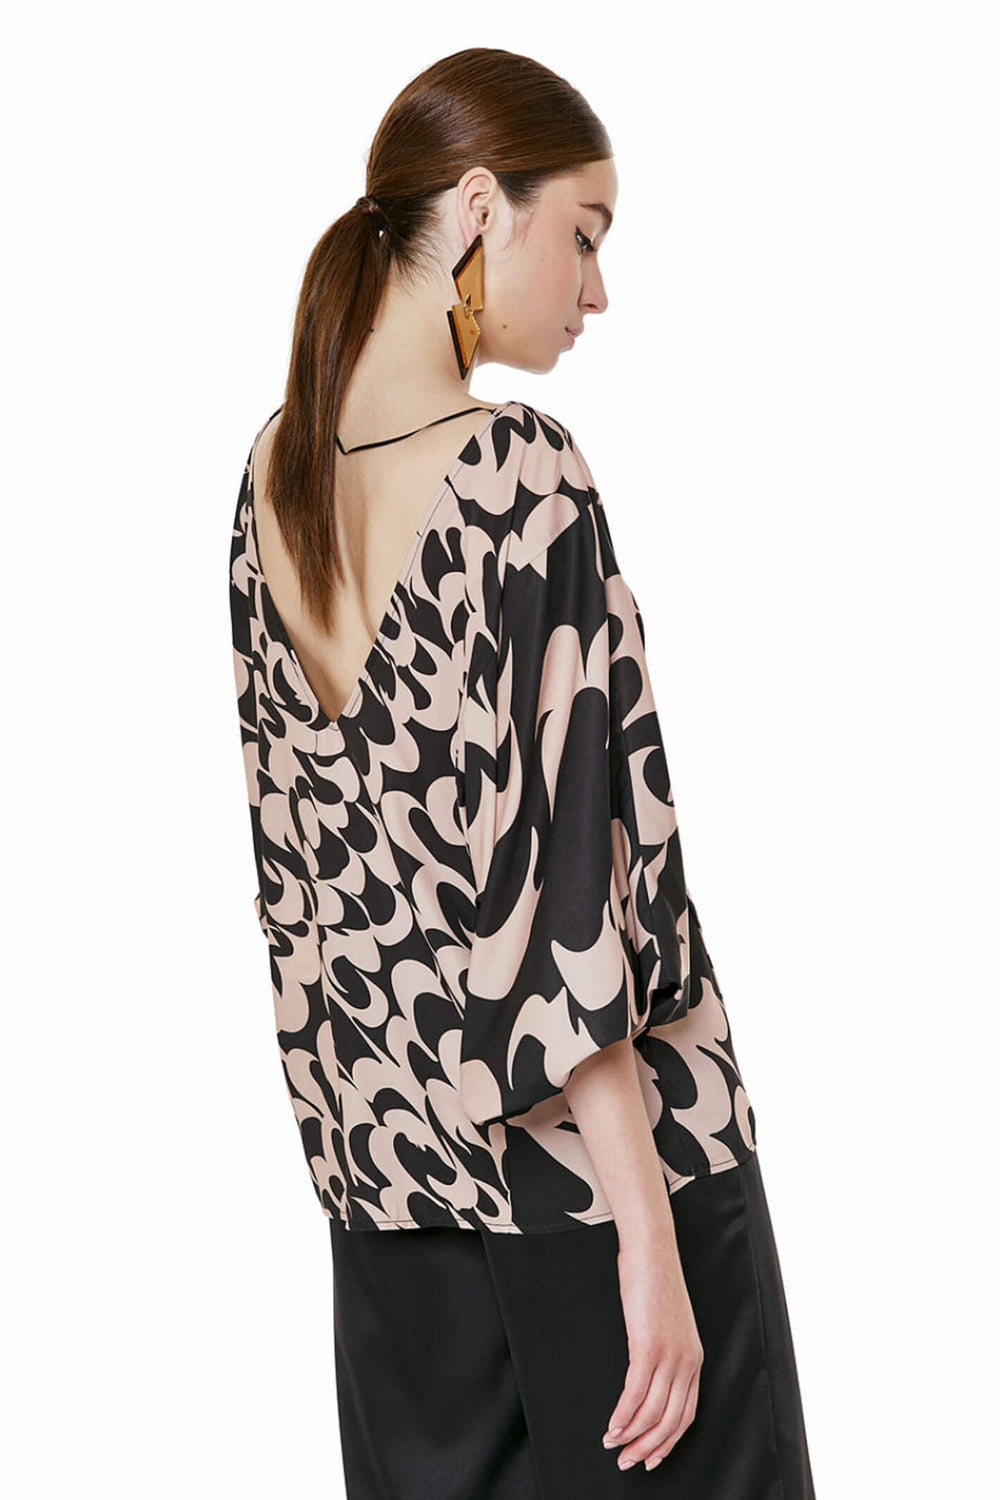 Access Fashion 2044 Beige Batwing Sleeve Top - Experience Boutique